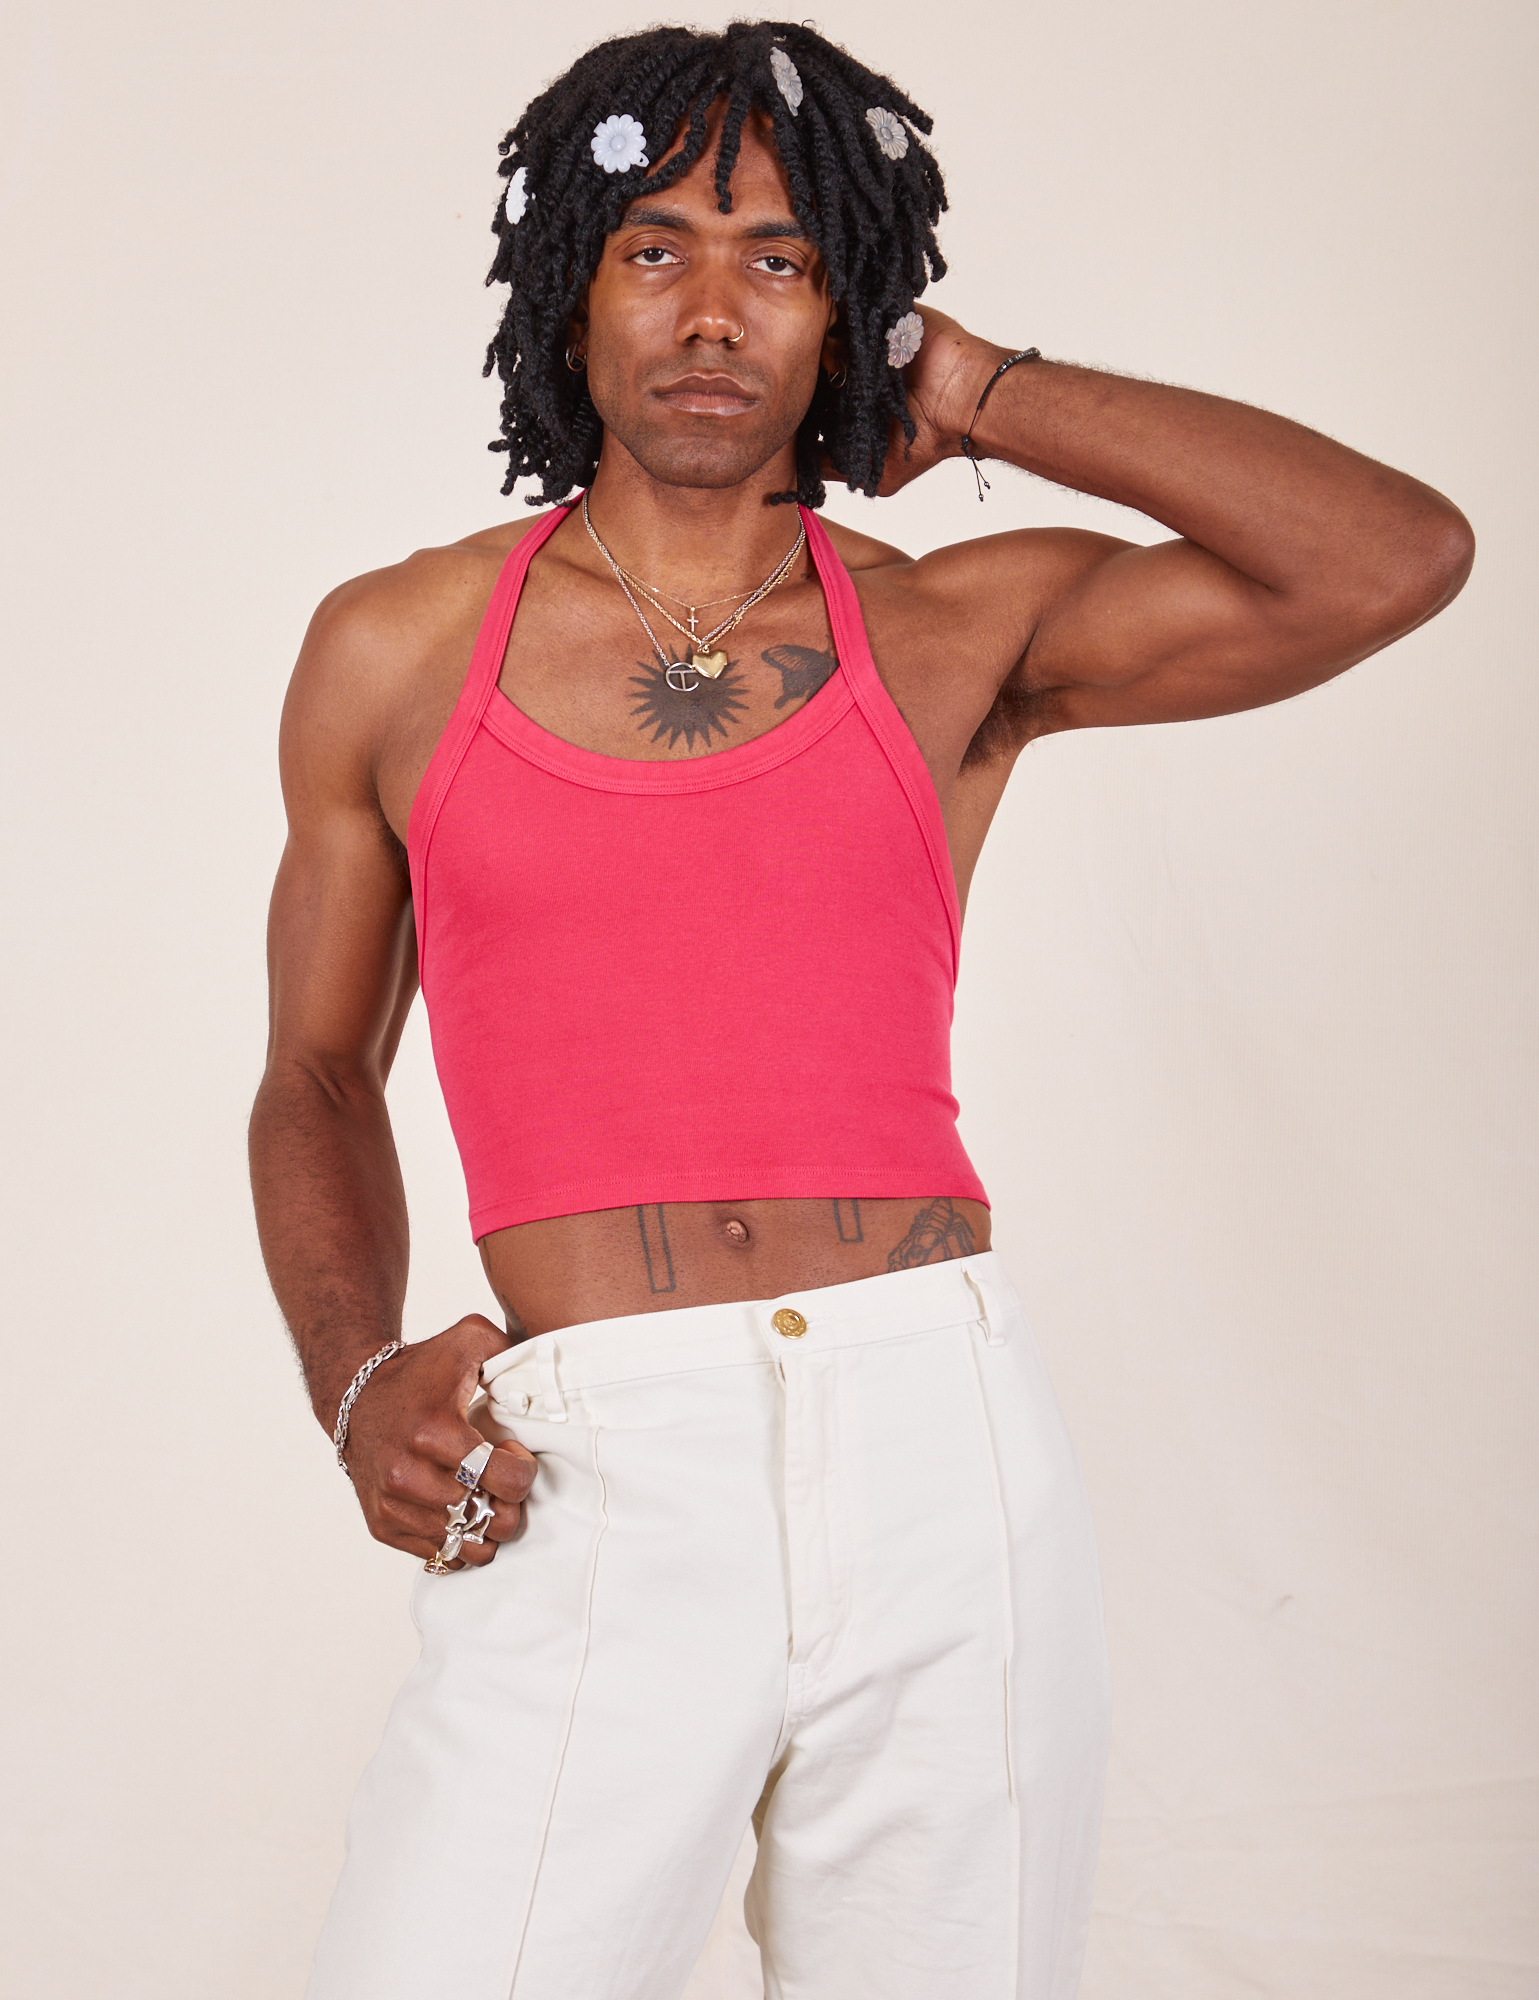 Jerrod is 6&#39;3&quot; and wearing XS Halter Top in Hot Pink paired with vintage off-white Western Pants